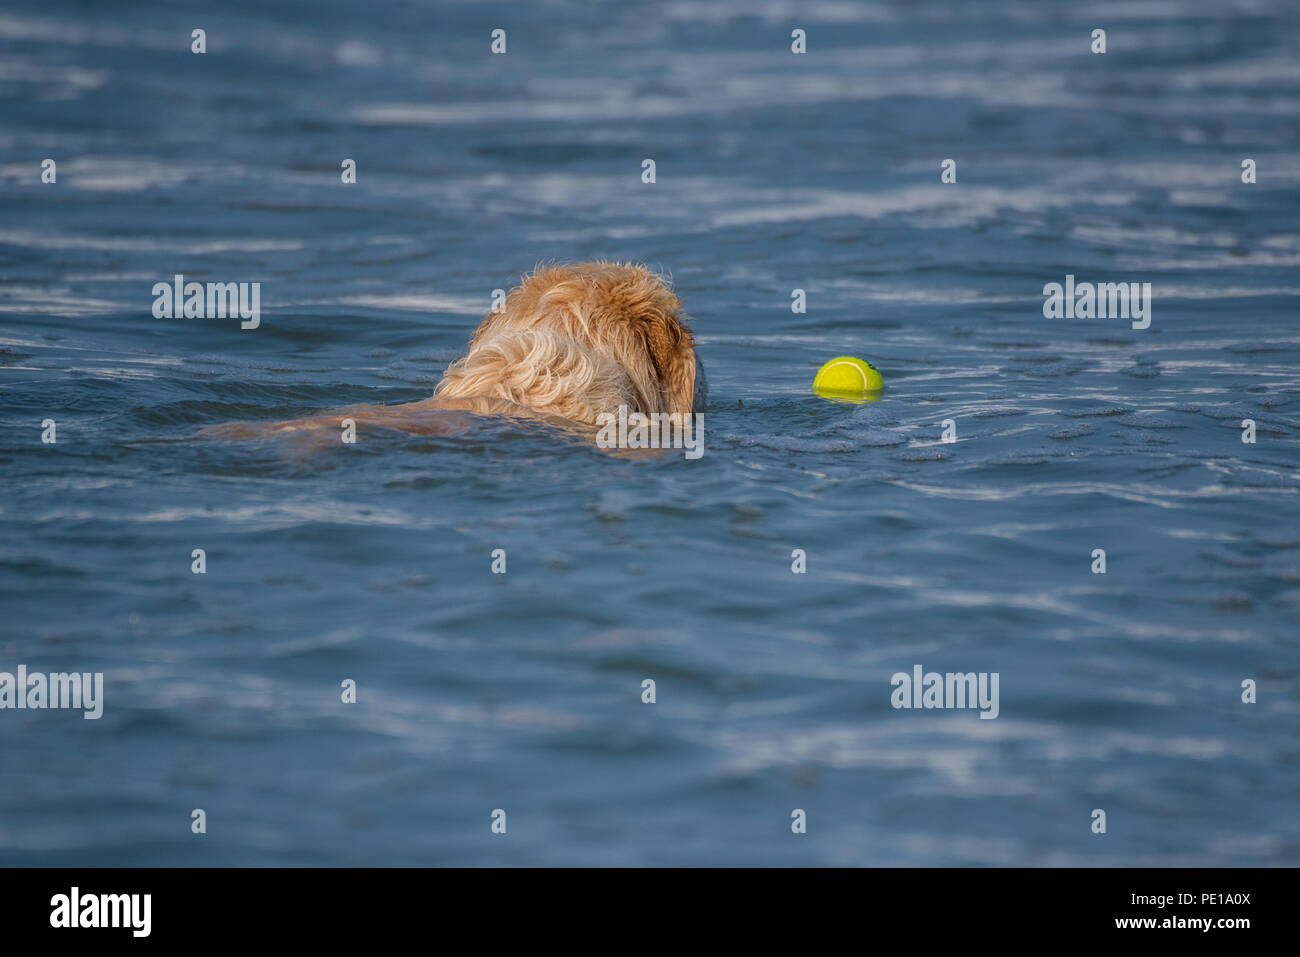 Experienced Golden Retriever swims out into ocean water to fetch floating tennis ball. Stock Photo